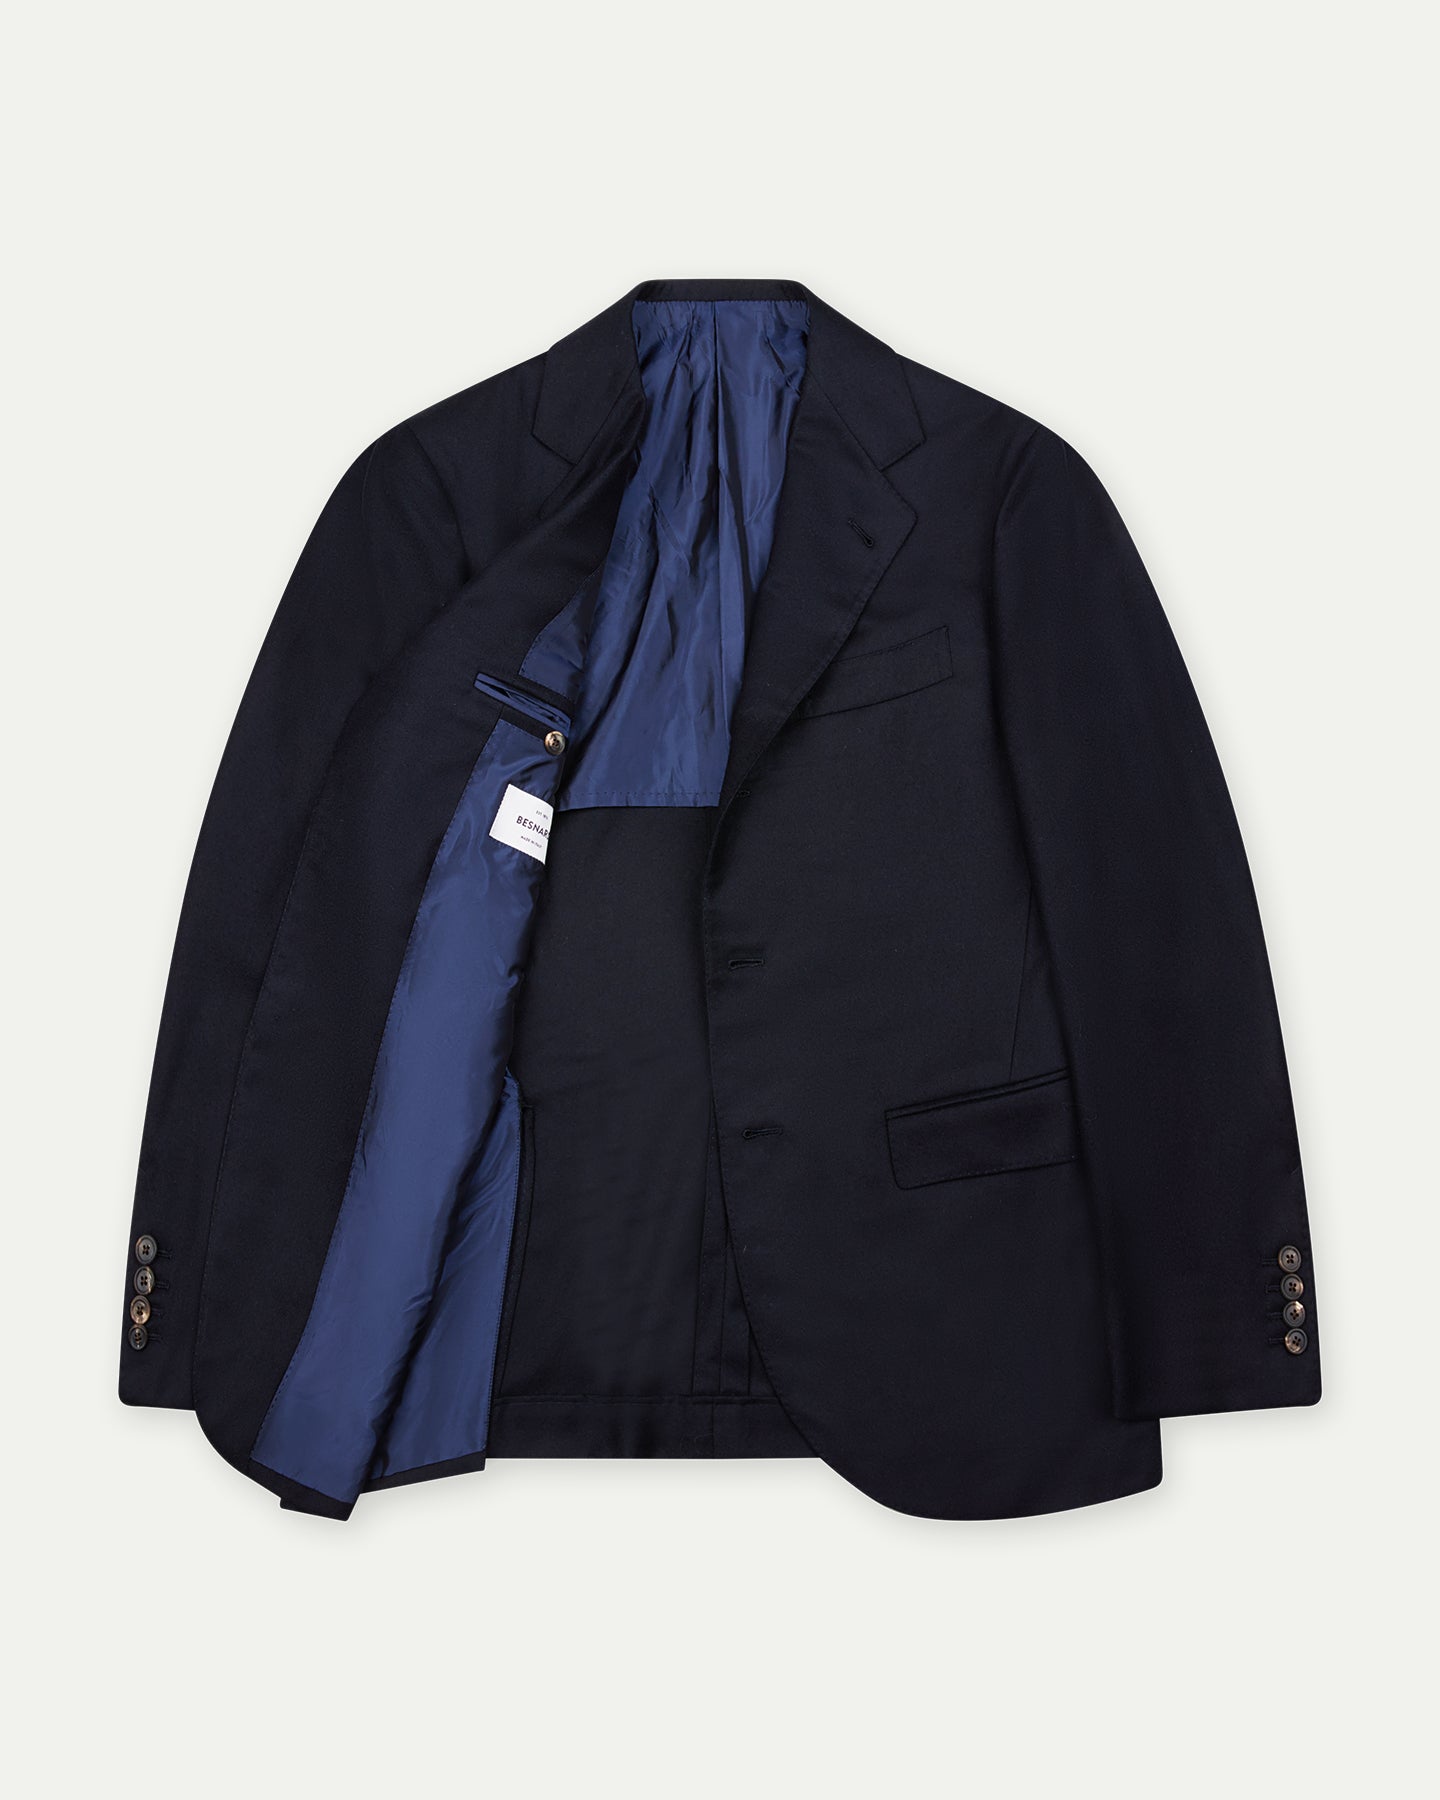 Made-To-Order Sport Coat Navy Wool Cashmere